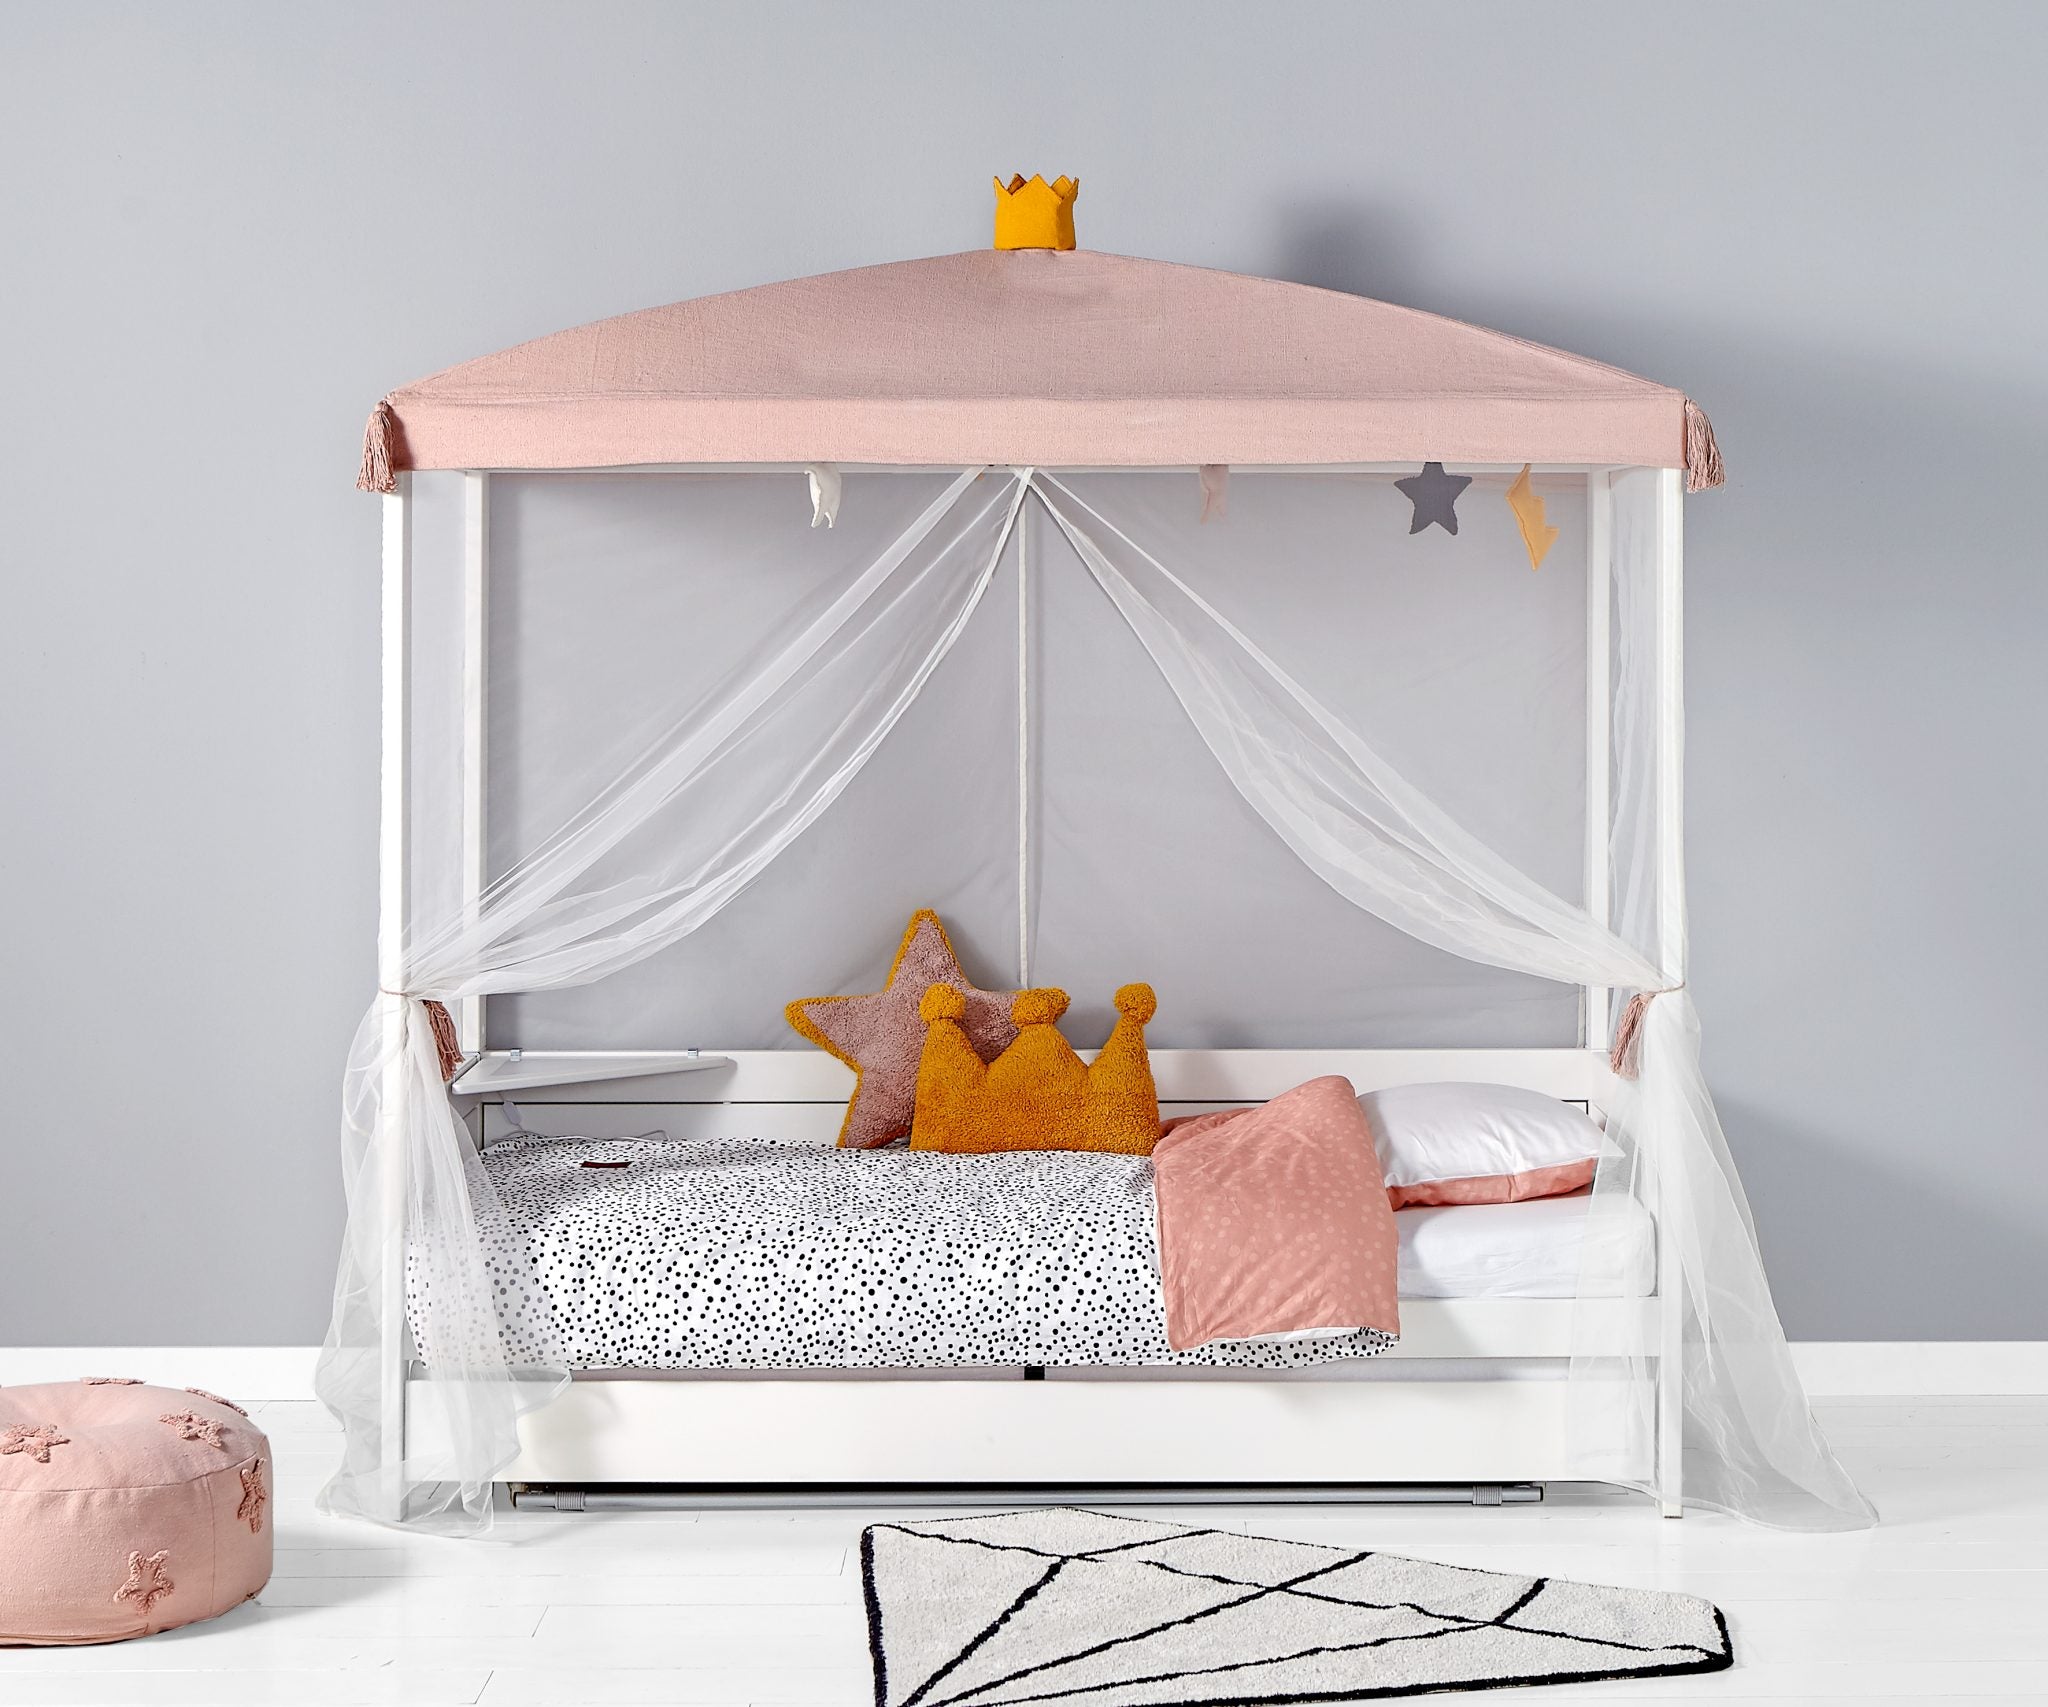 Which Features Are Typically Found In A Luxury Kids Bedroom?